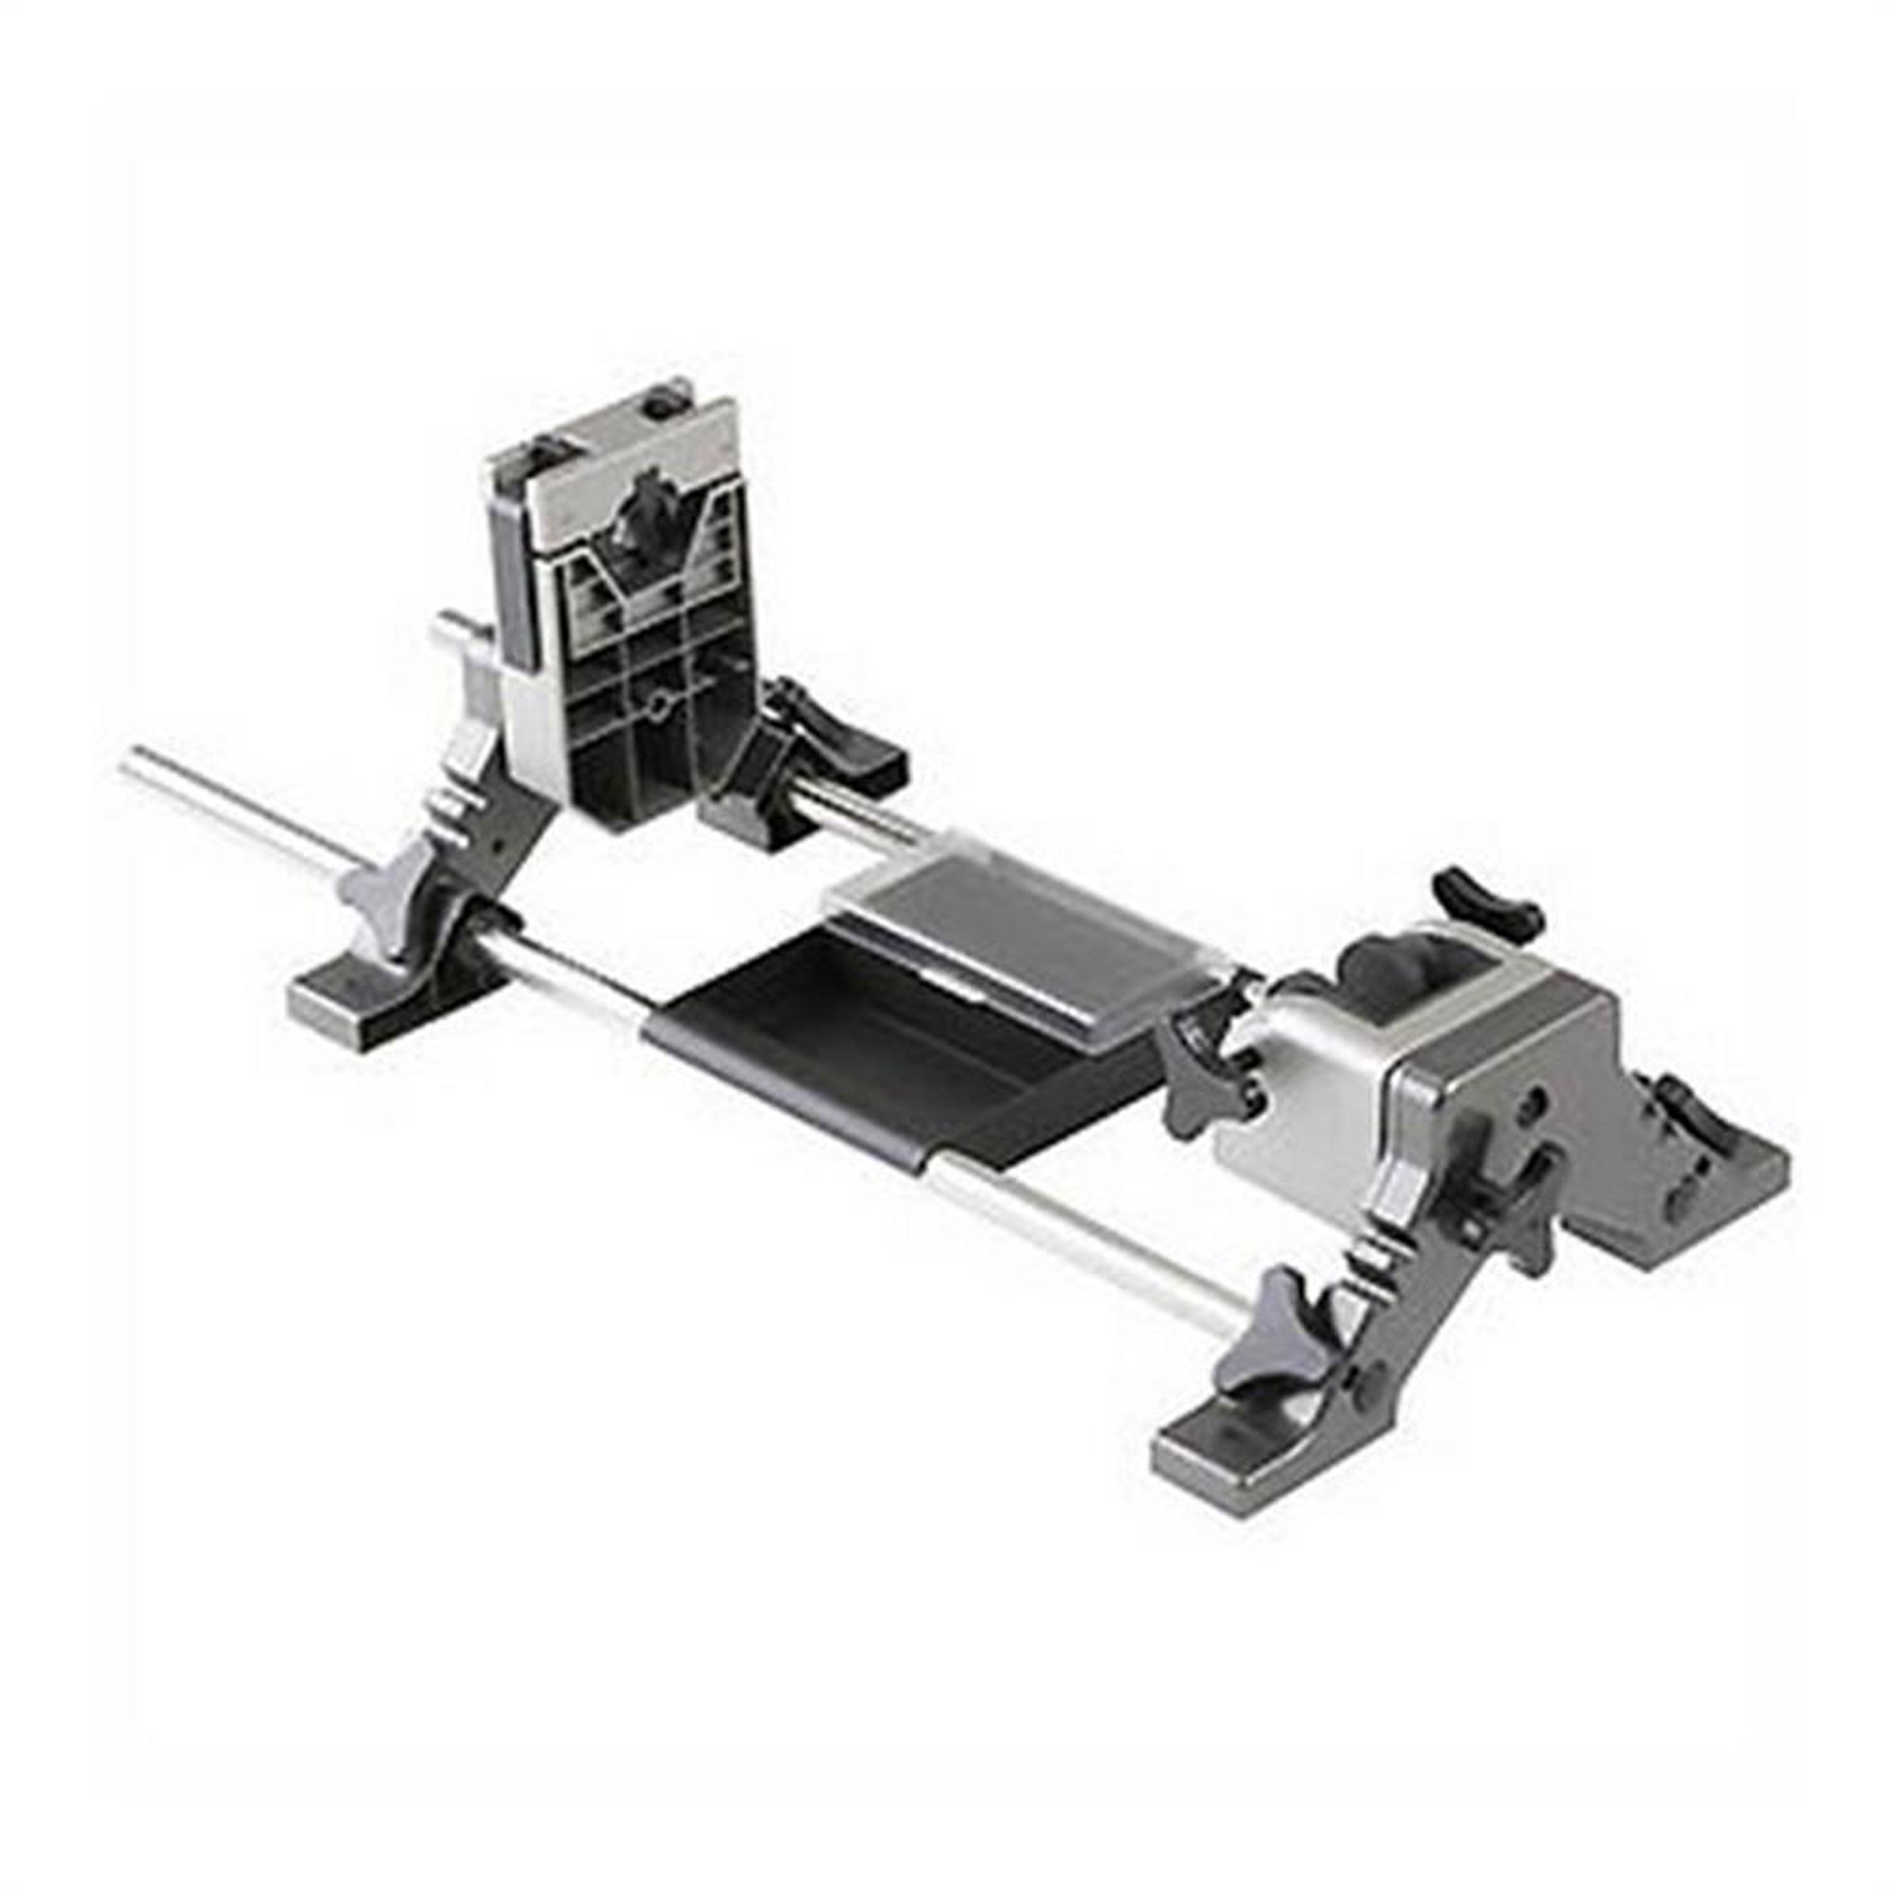 Lyman Revolution Rotating Gun Vise Engineered With a Full Range Of adjustments - Tilts, clamps & Has inserts To Securely